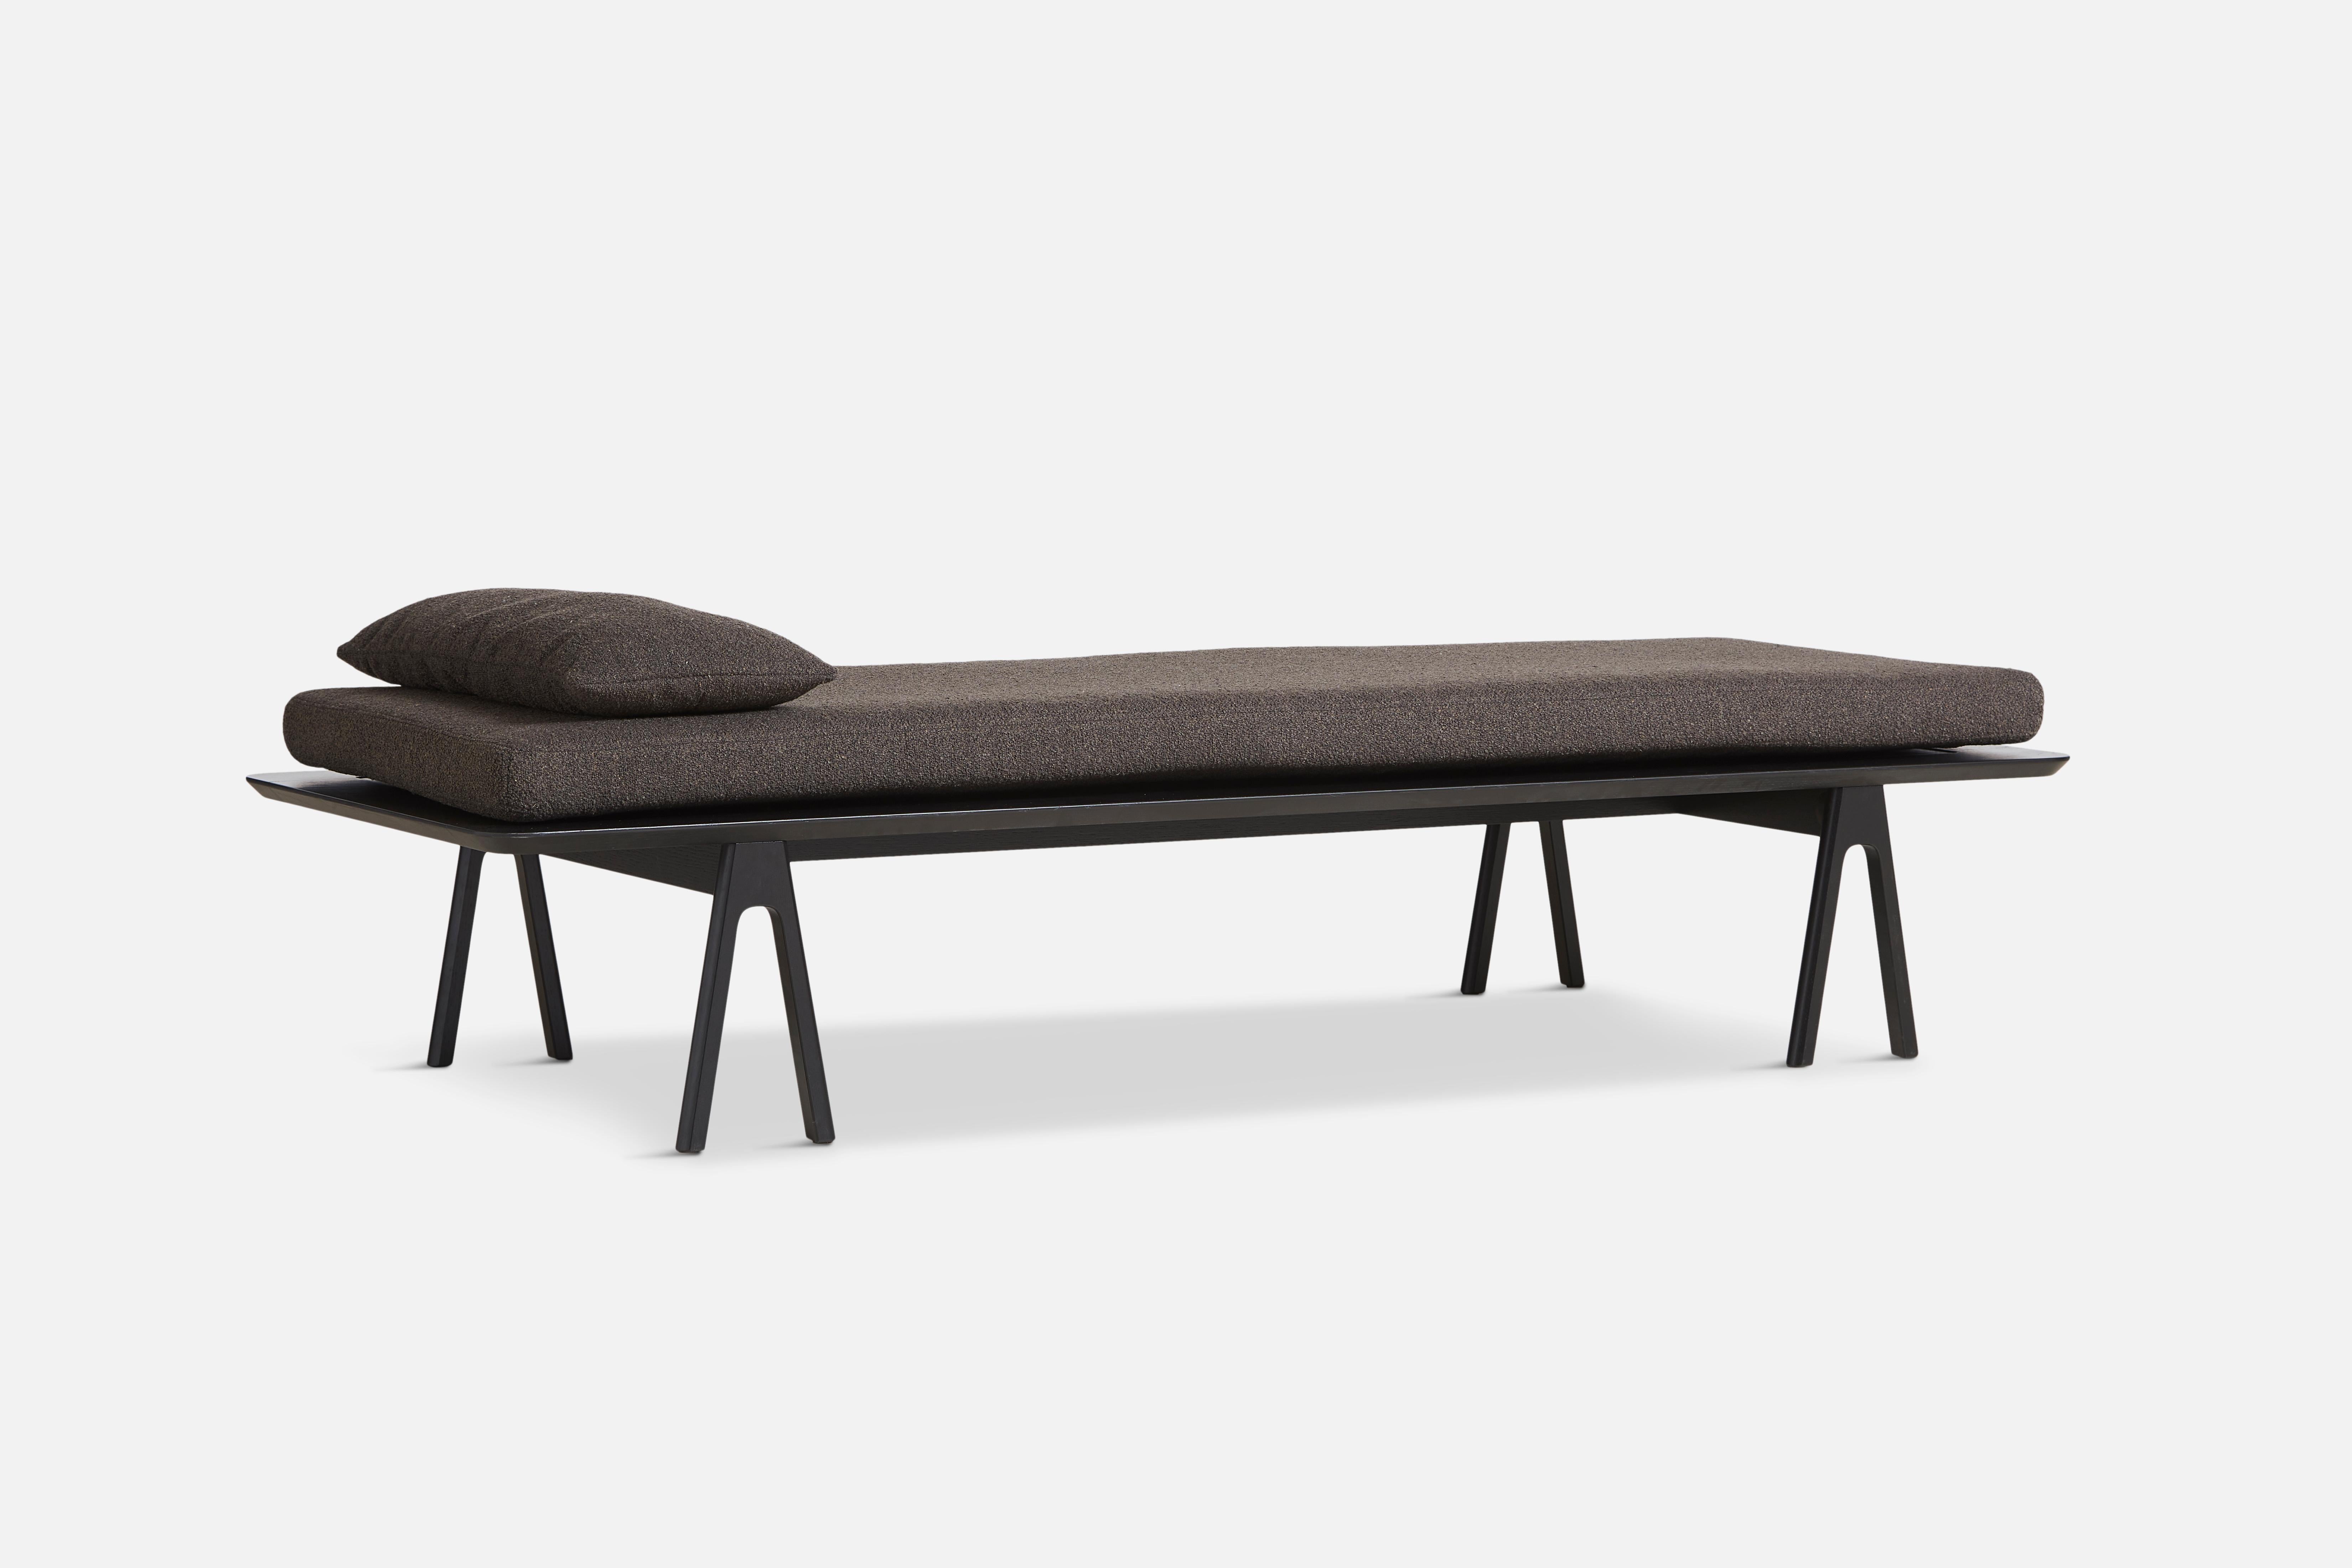 Dark brown boucle level daybed with pillow by Msds Studio.
Materials: Foam, oak, boucle.
Dimensions: D 76.5 x W 190 x H 41 cm // D 23.5 x W 67 x H 8.5 cm.
Also available in different colors.

The founders, Mia and Torben Koed, decided to put